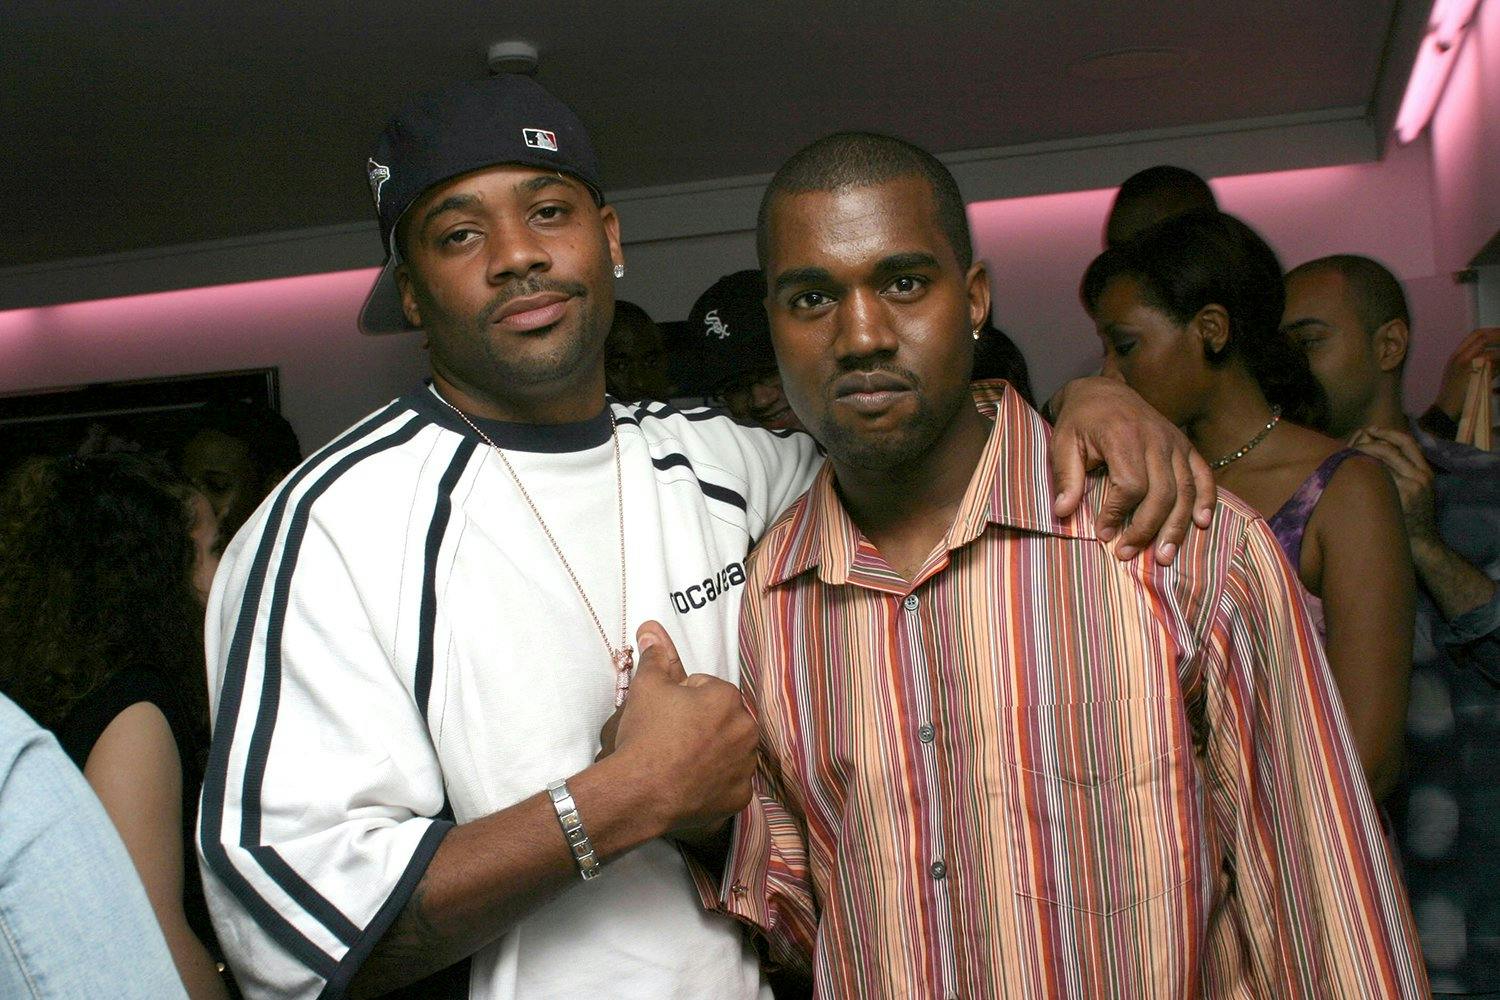 Damon Dash and Kanye West during Kanye West's Album Preview Party at 40/40 in New York City, New York, United States.